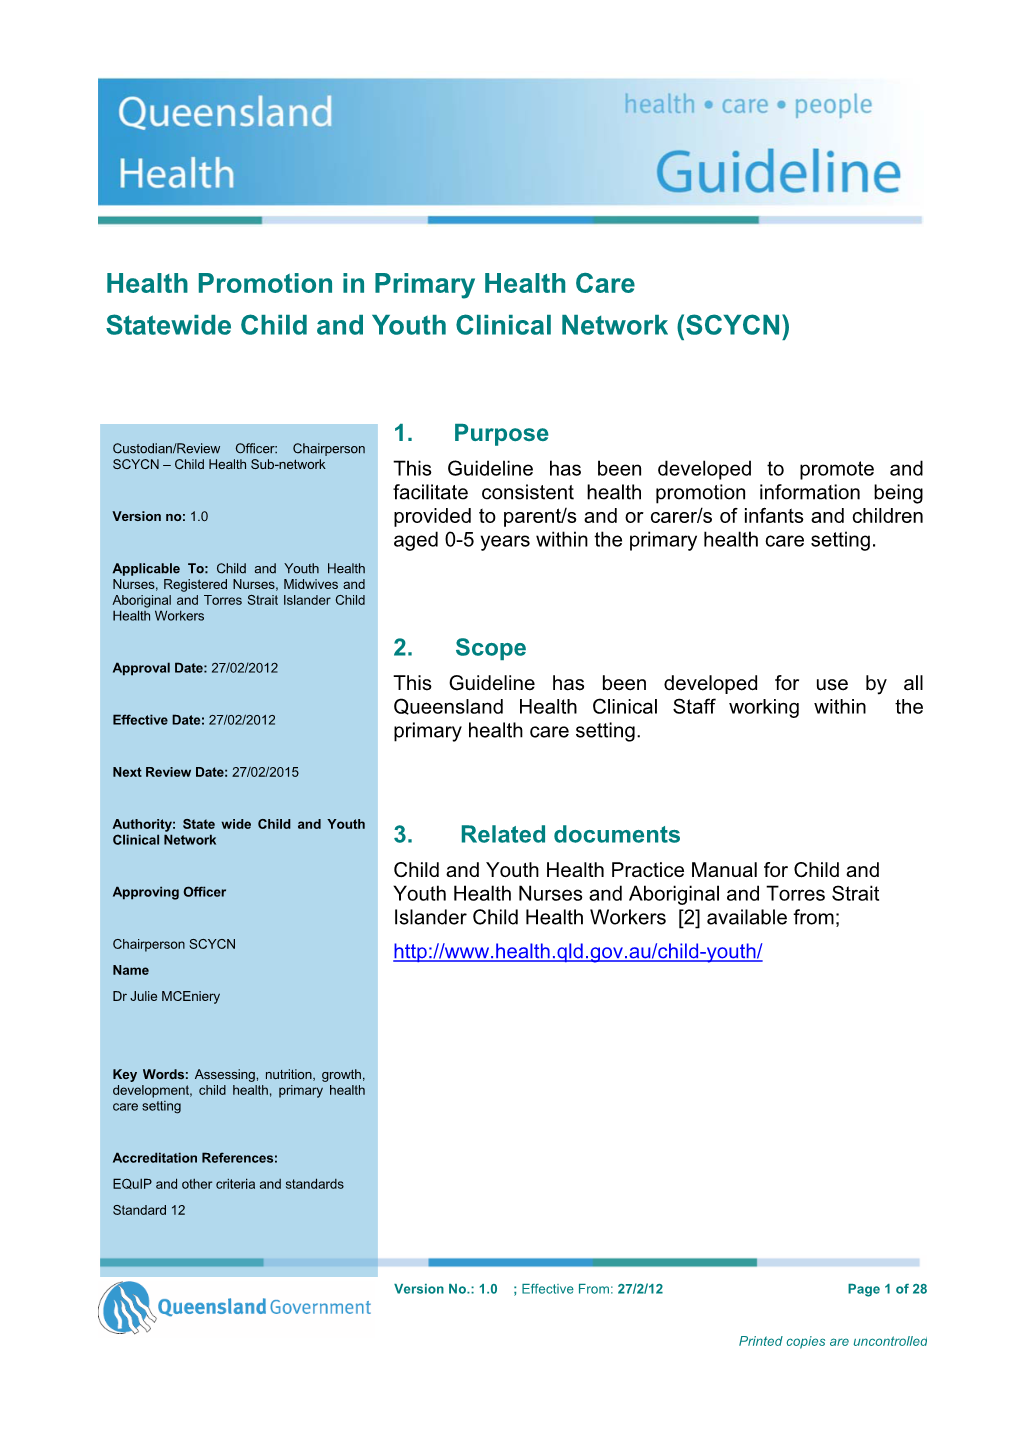 Health Promotion in Primary Health Care Statewide Child and Youth Clinical Network (SCYCN)